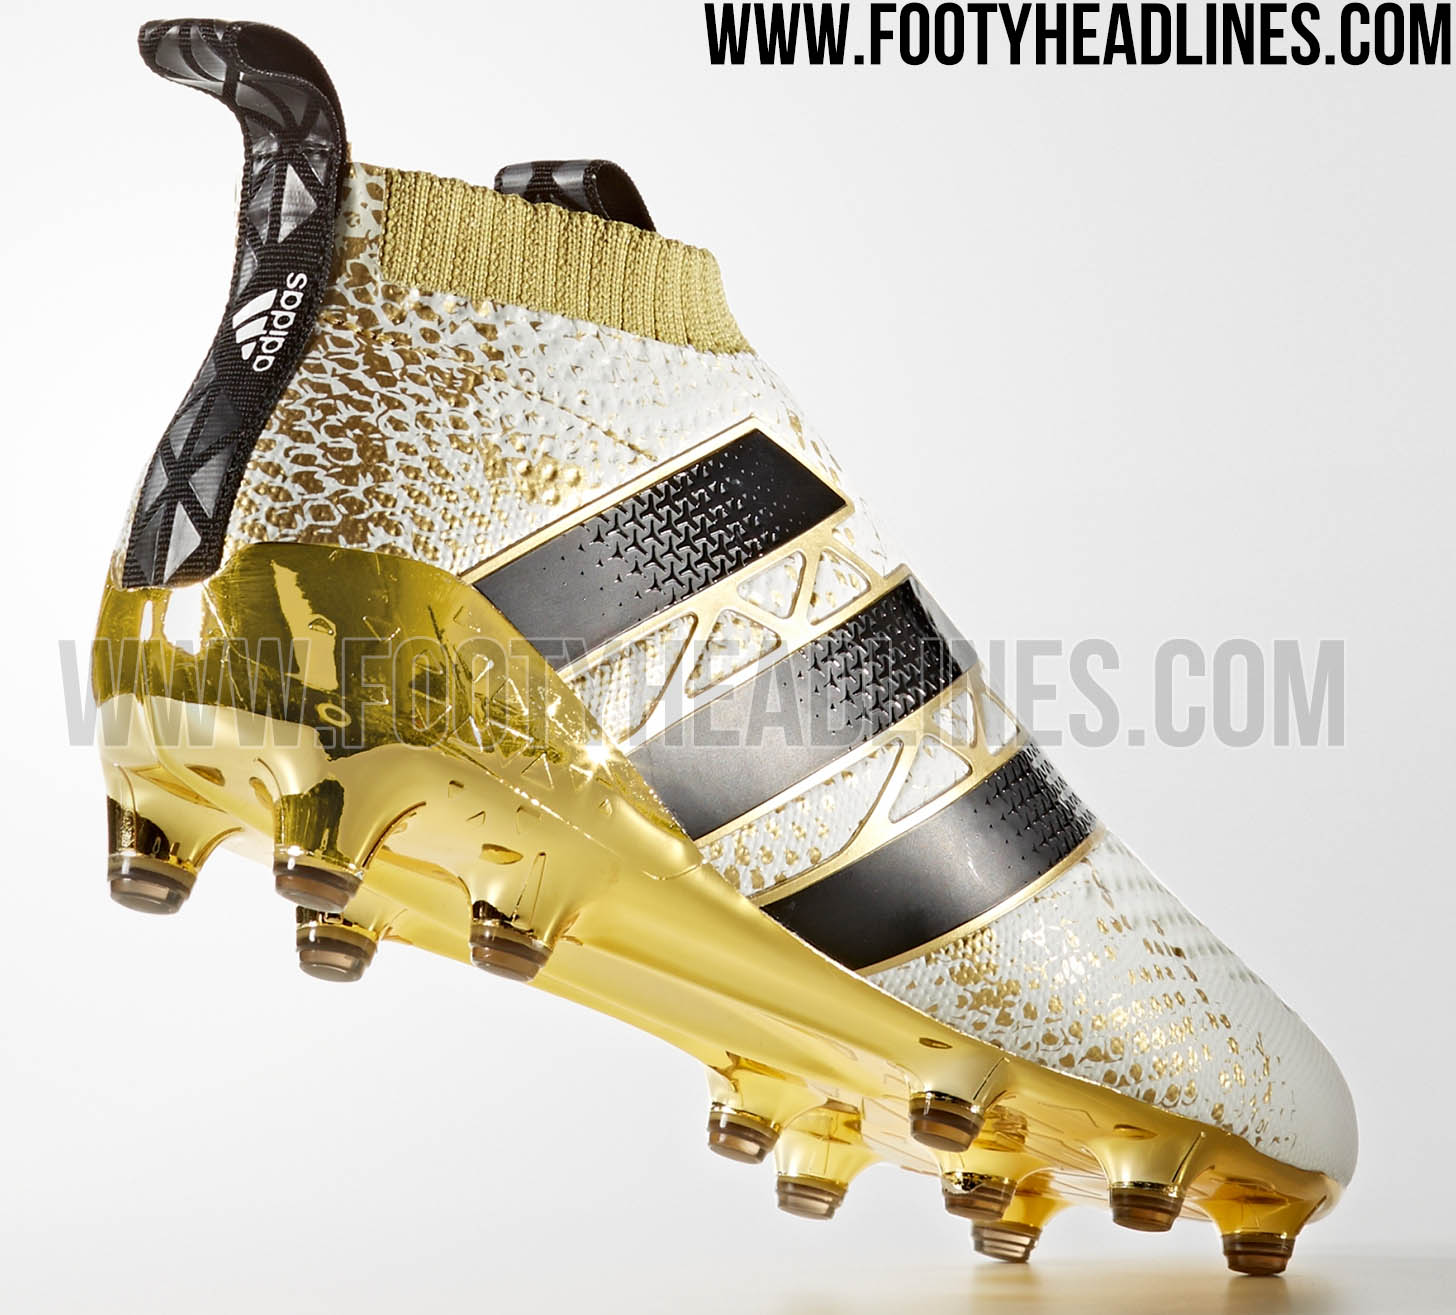 White / Gold Ace 16+ PureControl Stellar Released - Footy Headlines